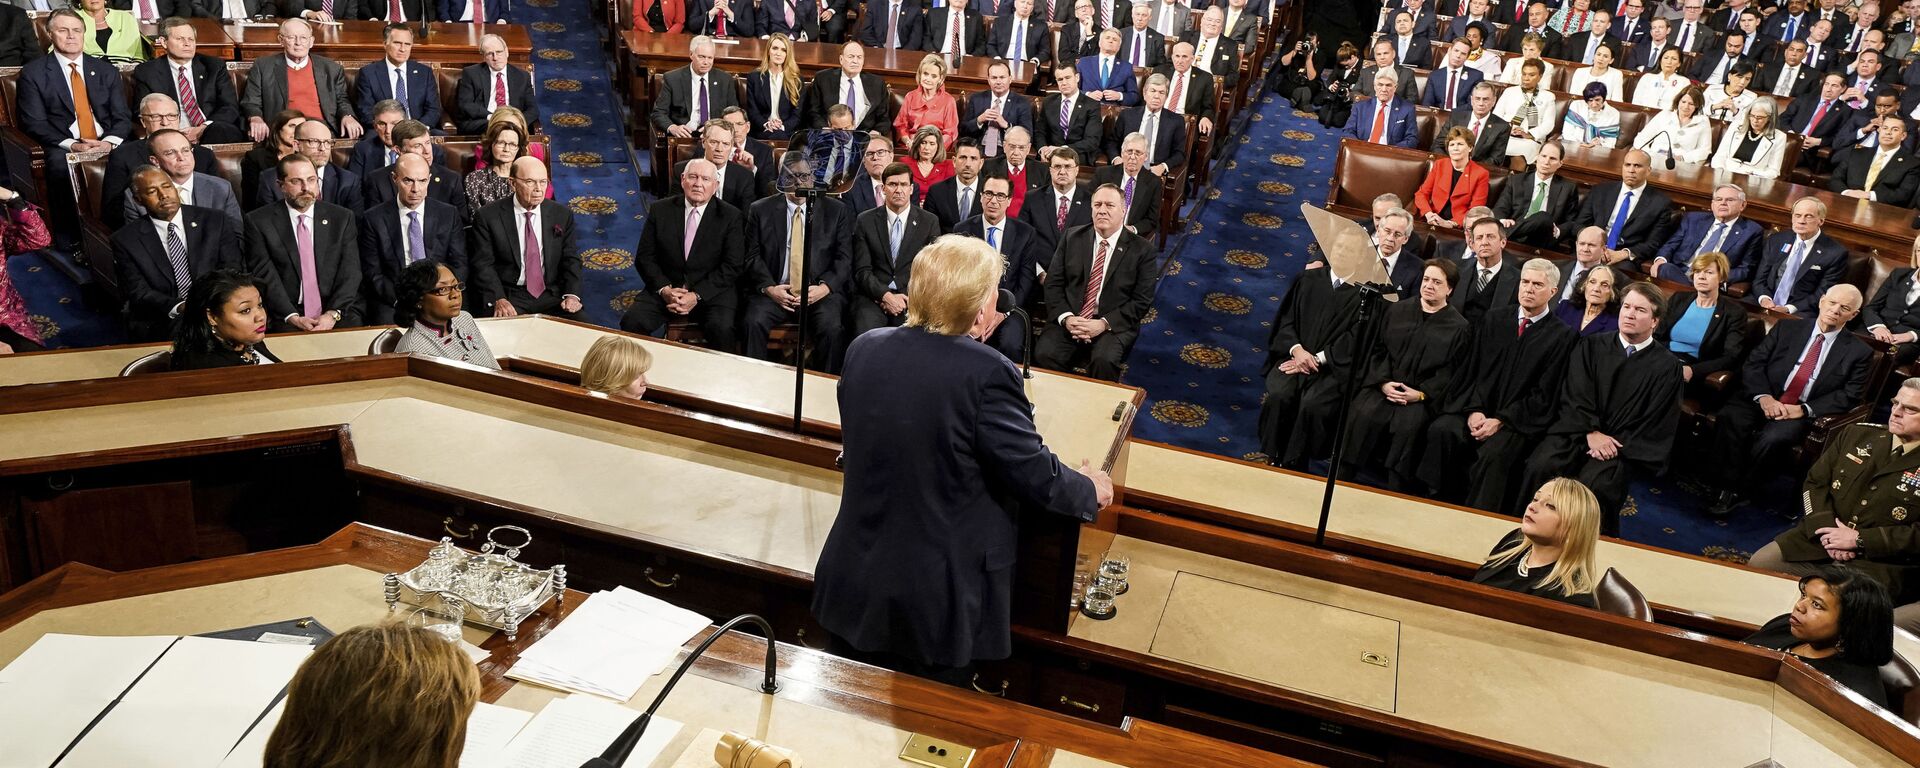 President Donald Trump delivers his State of the Union address to a joint session of Congress on Capitol Hill in Washington, Tuesday, Feb. 4, 2020, as House Speaker Nancy Pelosi of Calif., left, watches. - Sputnik International, 1920, 07.08.2022